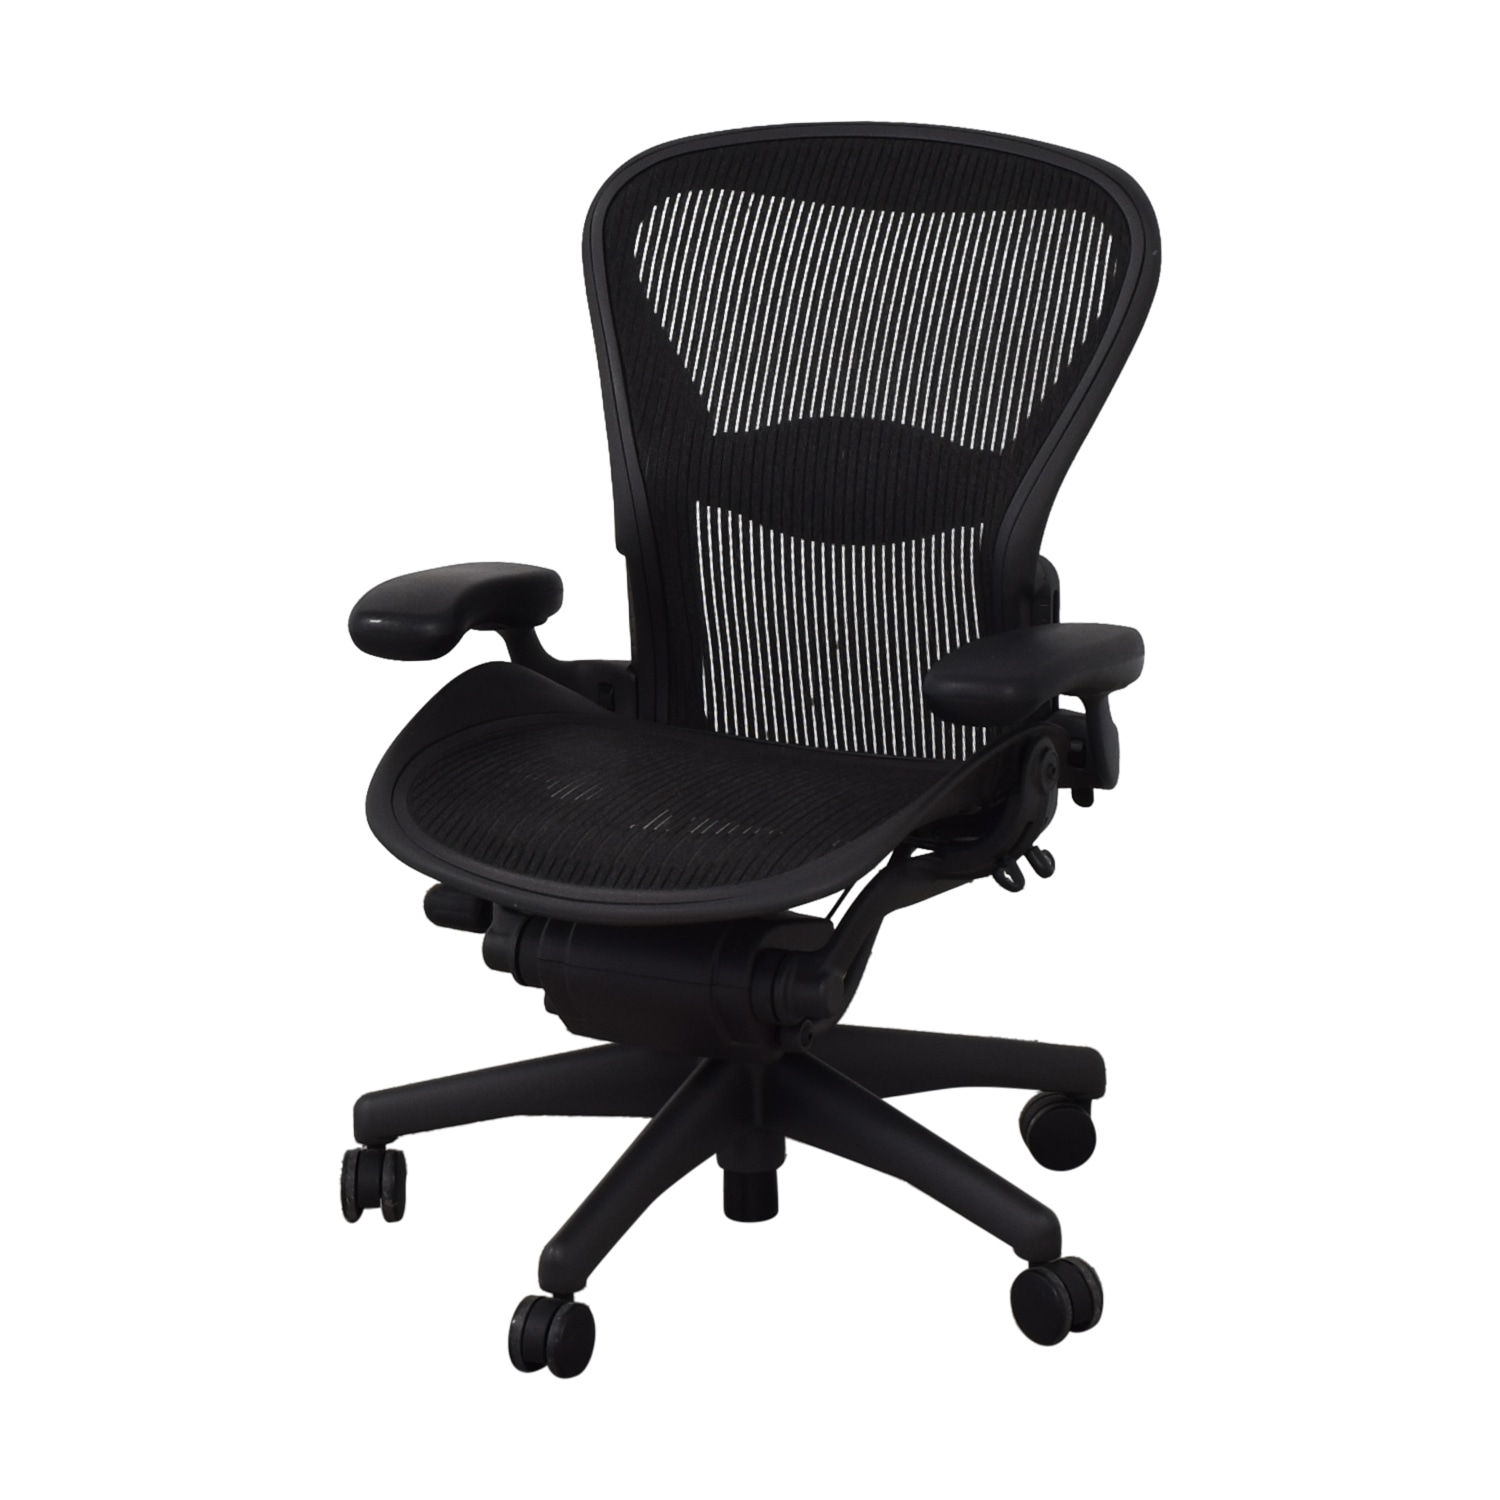 https://res.cloudinary.com/dkqtxtobb/image/upload/f_auto,q_auto:best,w_1500/product-assets/88430/herman-miller/chairs/home-office-chairs/sell-herman-miller-aeron-medium-classic-size-b-office-chair.jpeg